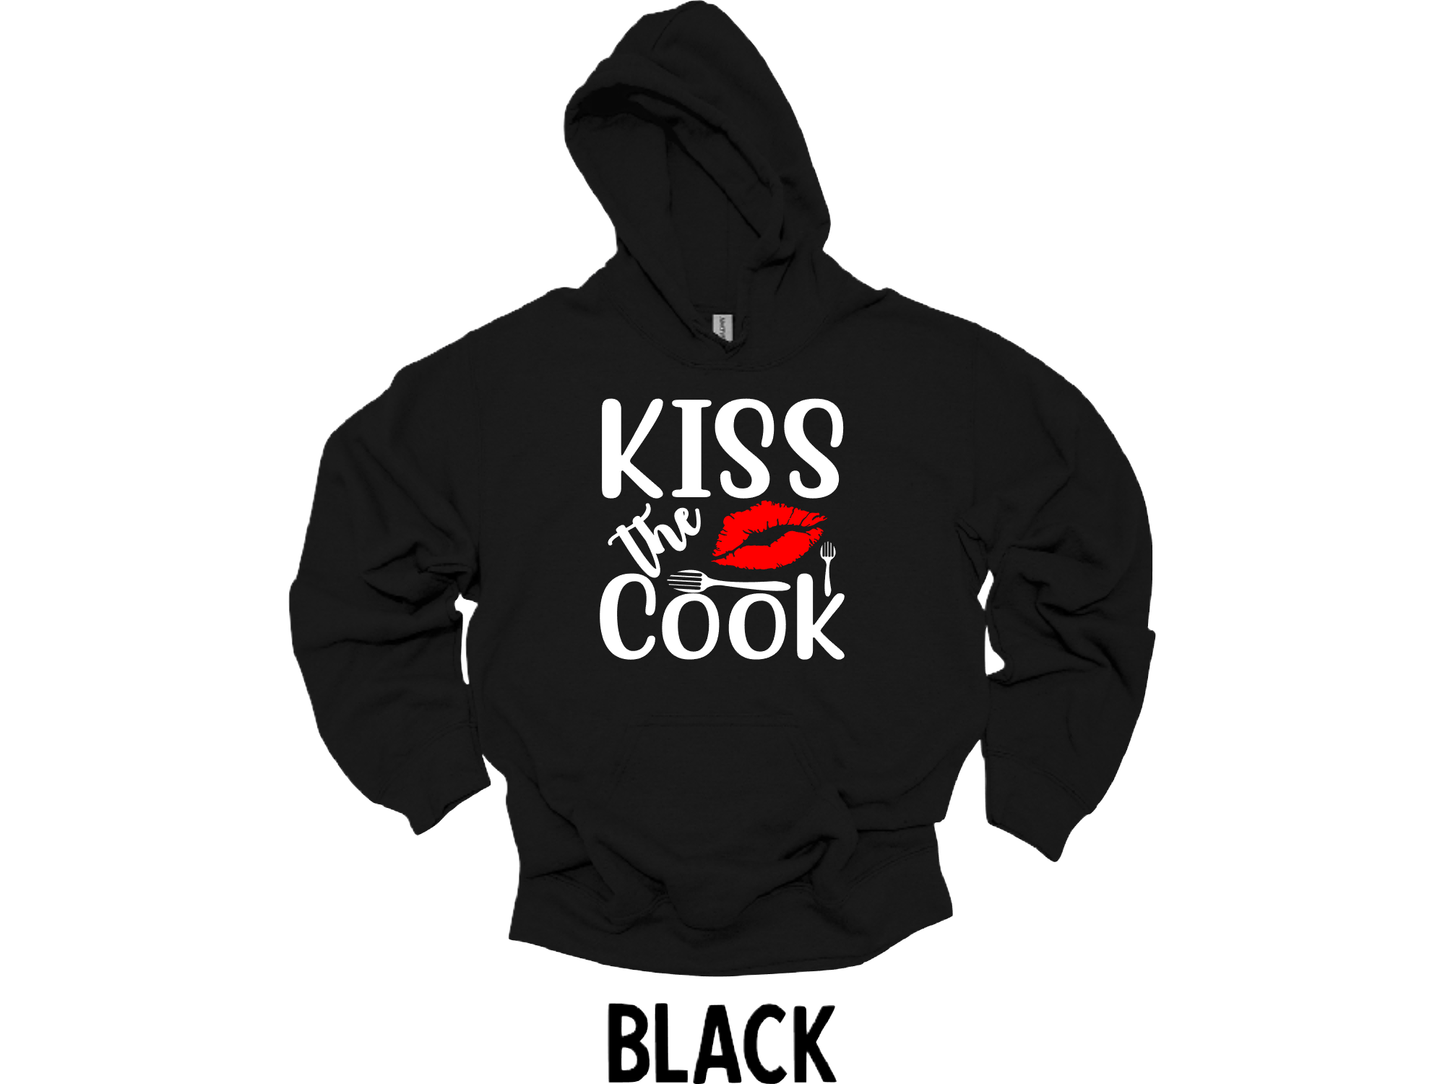 Kiss the cook t-shirt or hoodie (New Arrival)